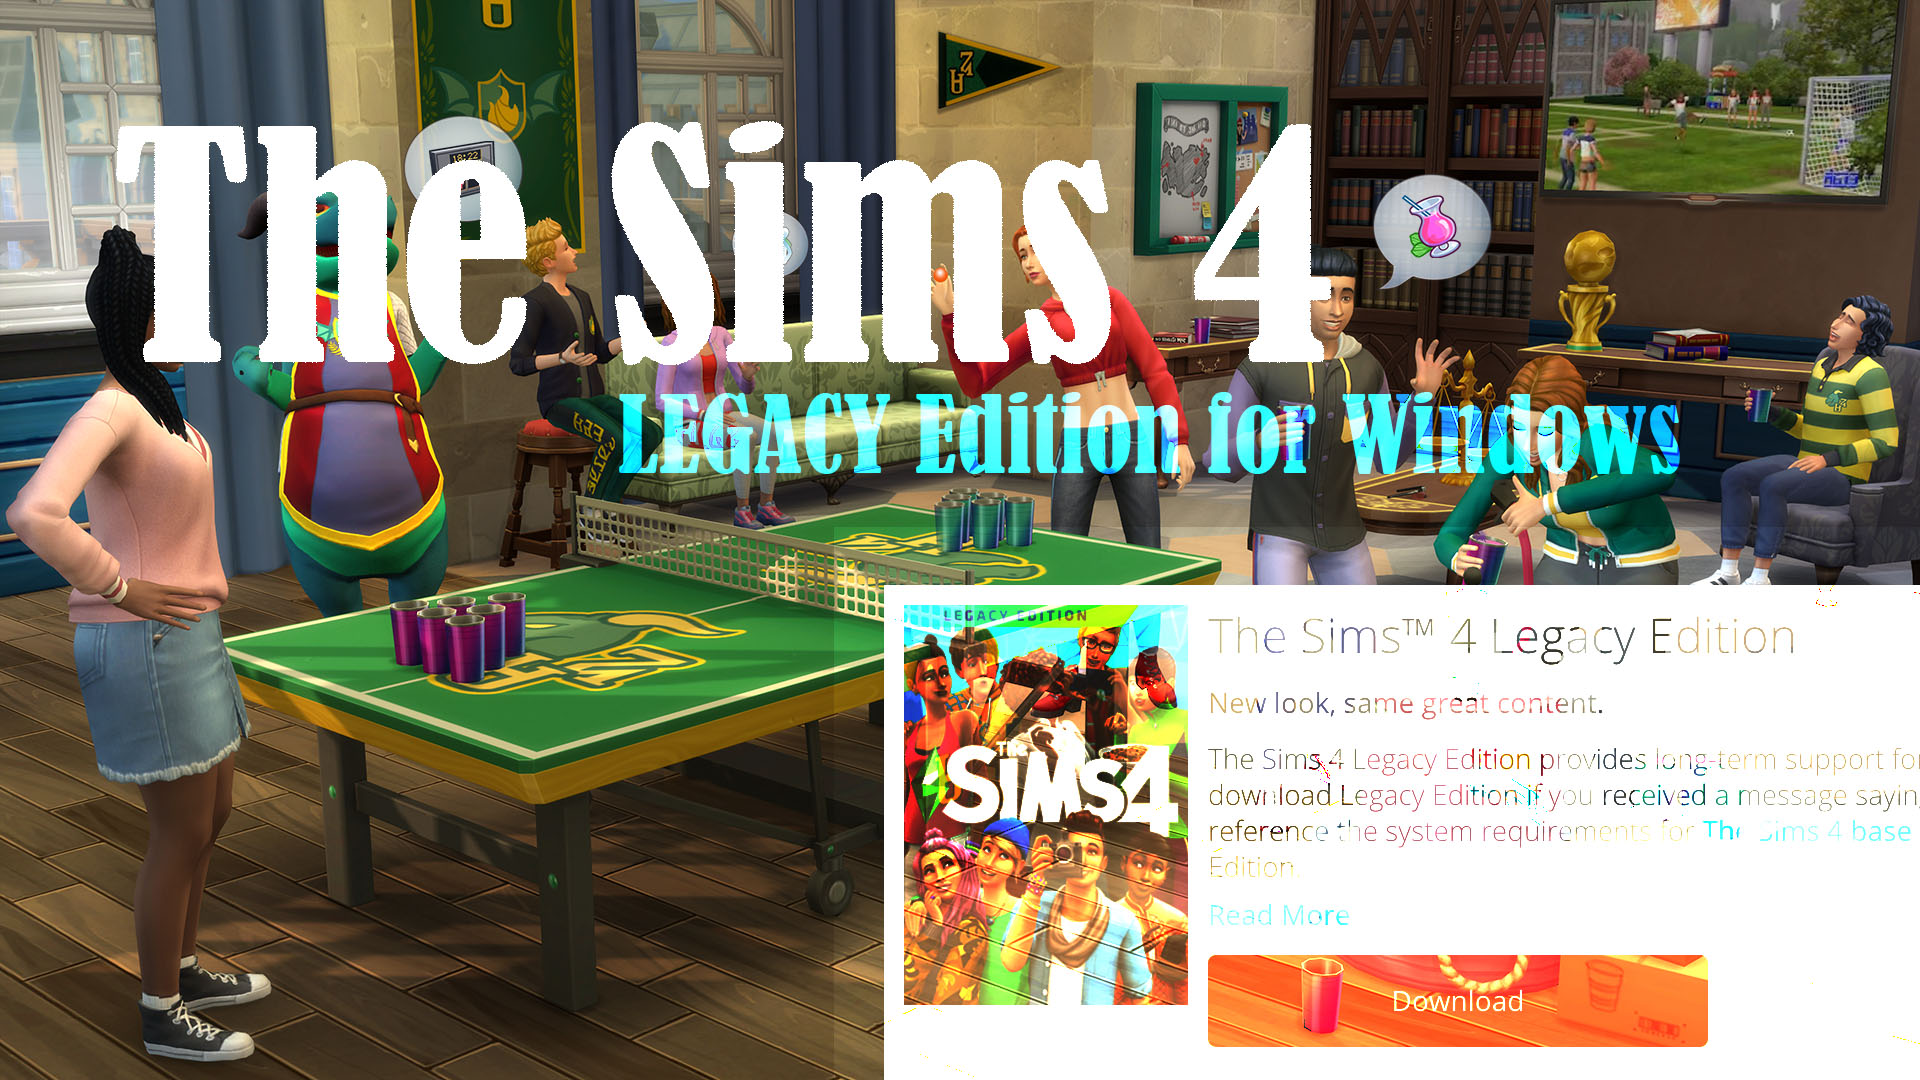 How To Fix The Sims 4 Legacy Edition Issues In Windows The Droid Guy